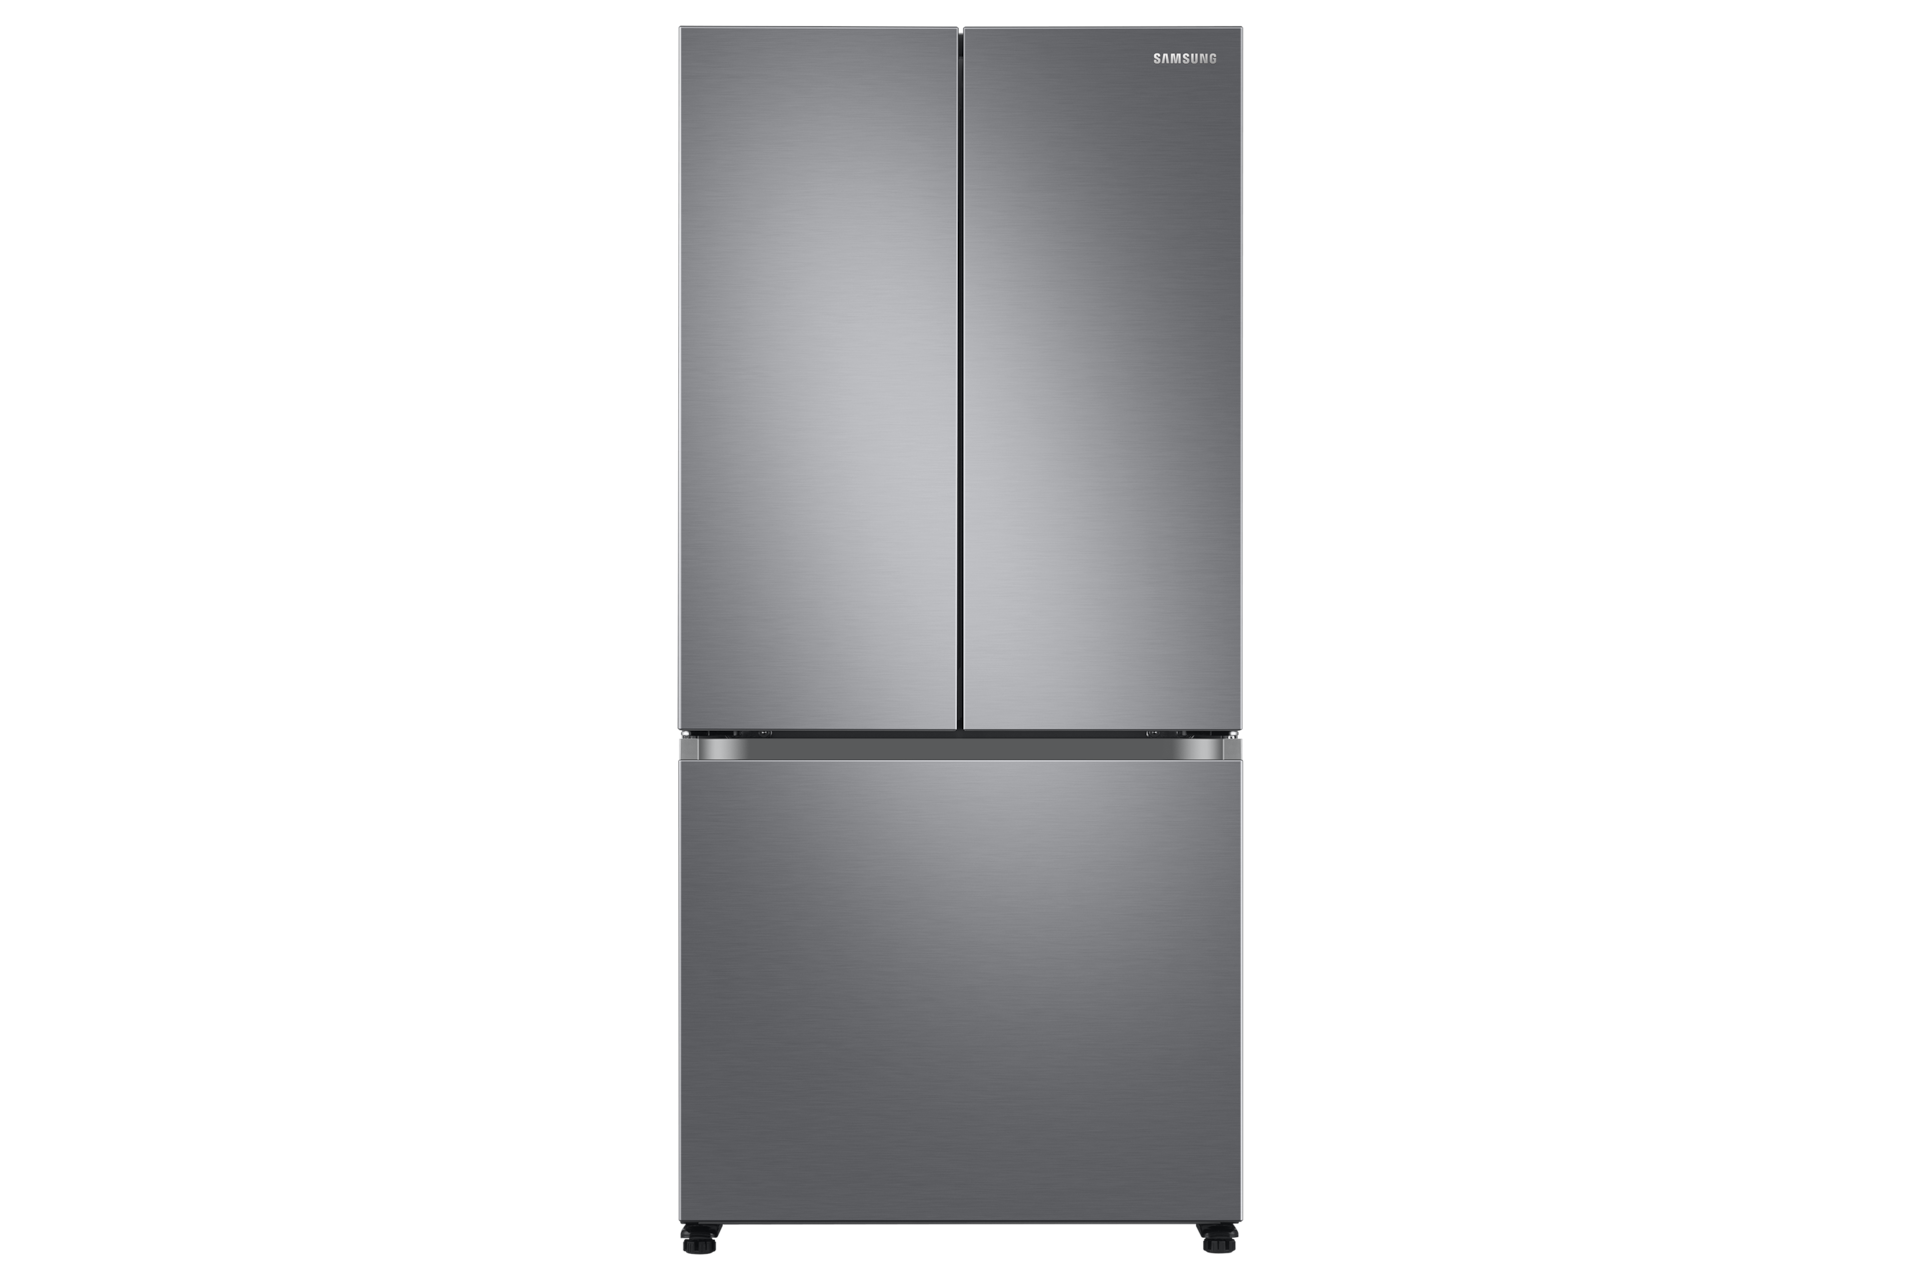 Samsung 580L Inverter Frost Free French Door Refrigerator (RF57A5032S9/TL Refined Inox,Convertible)